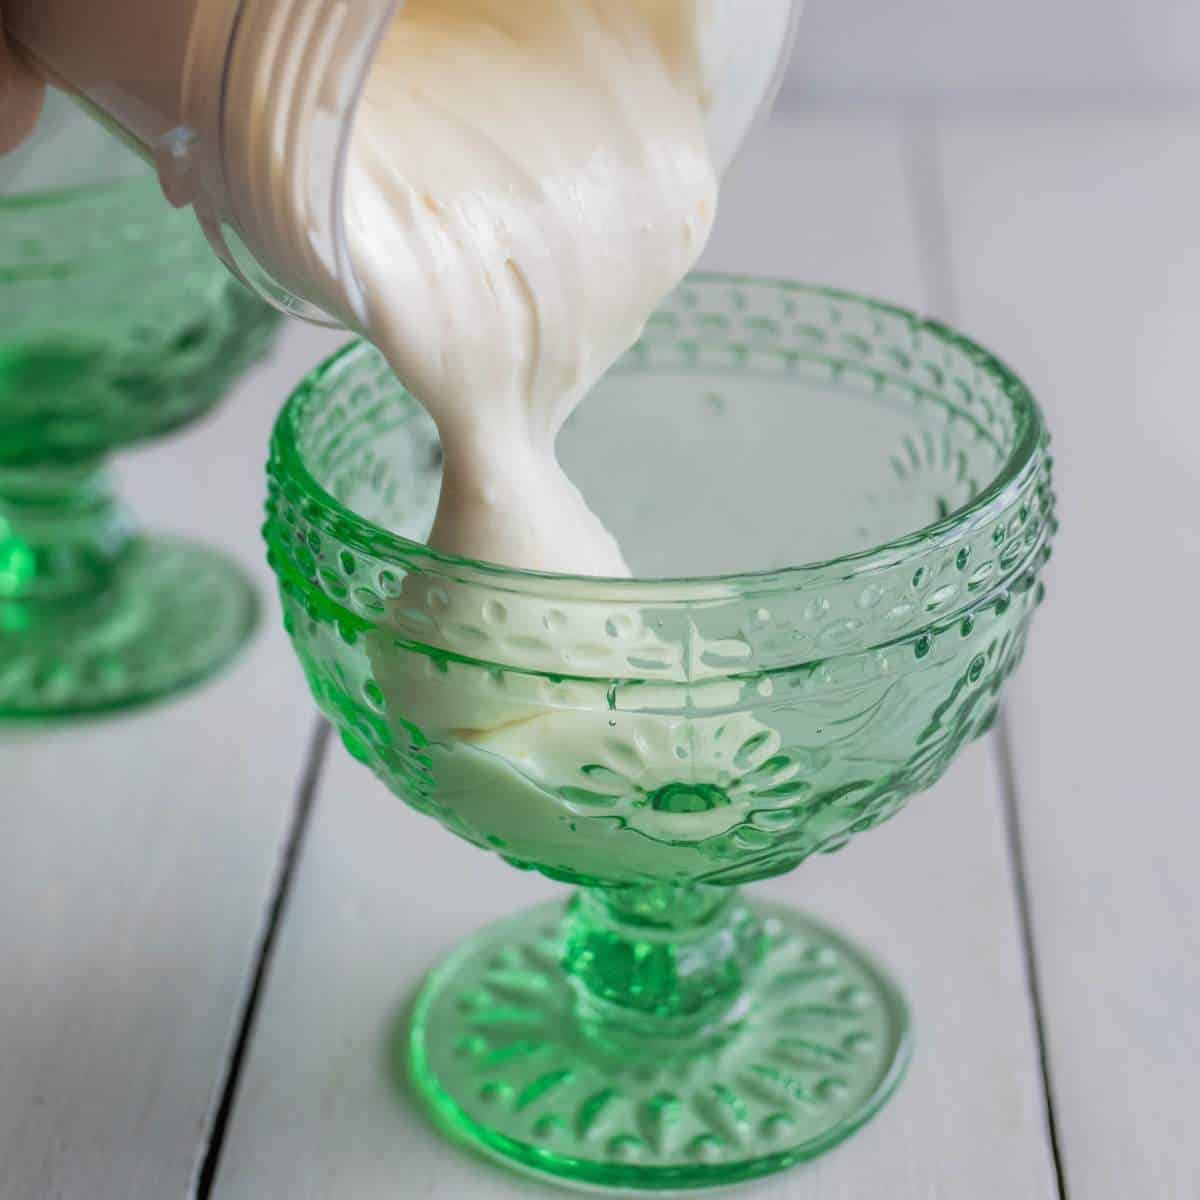 Pouring Cottage Cheese Lemon Mousse from a blender cup into a green dessert bowl.